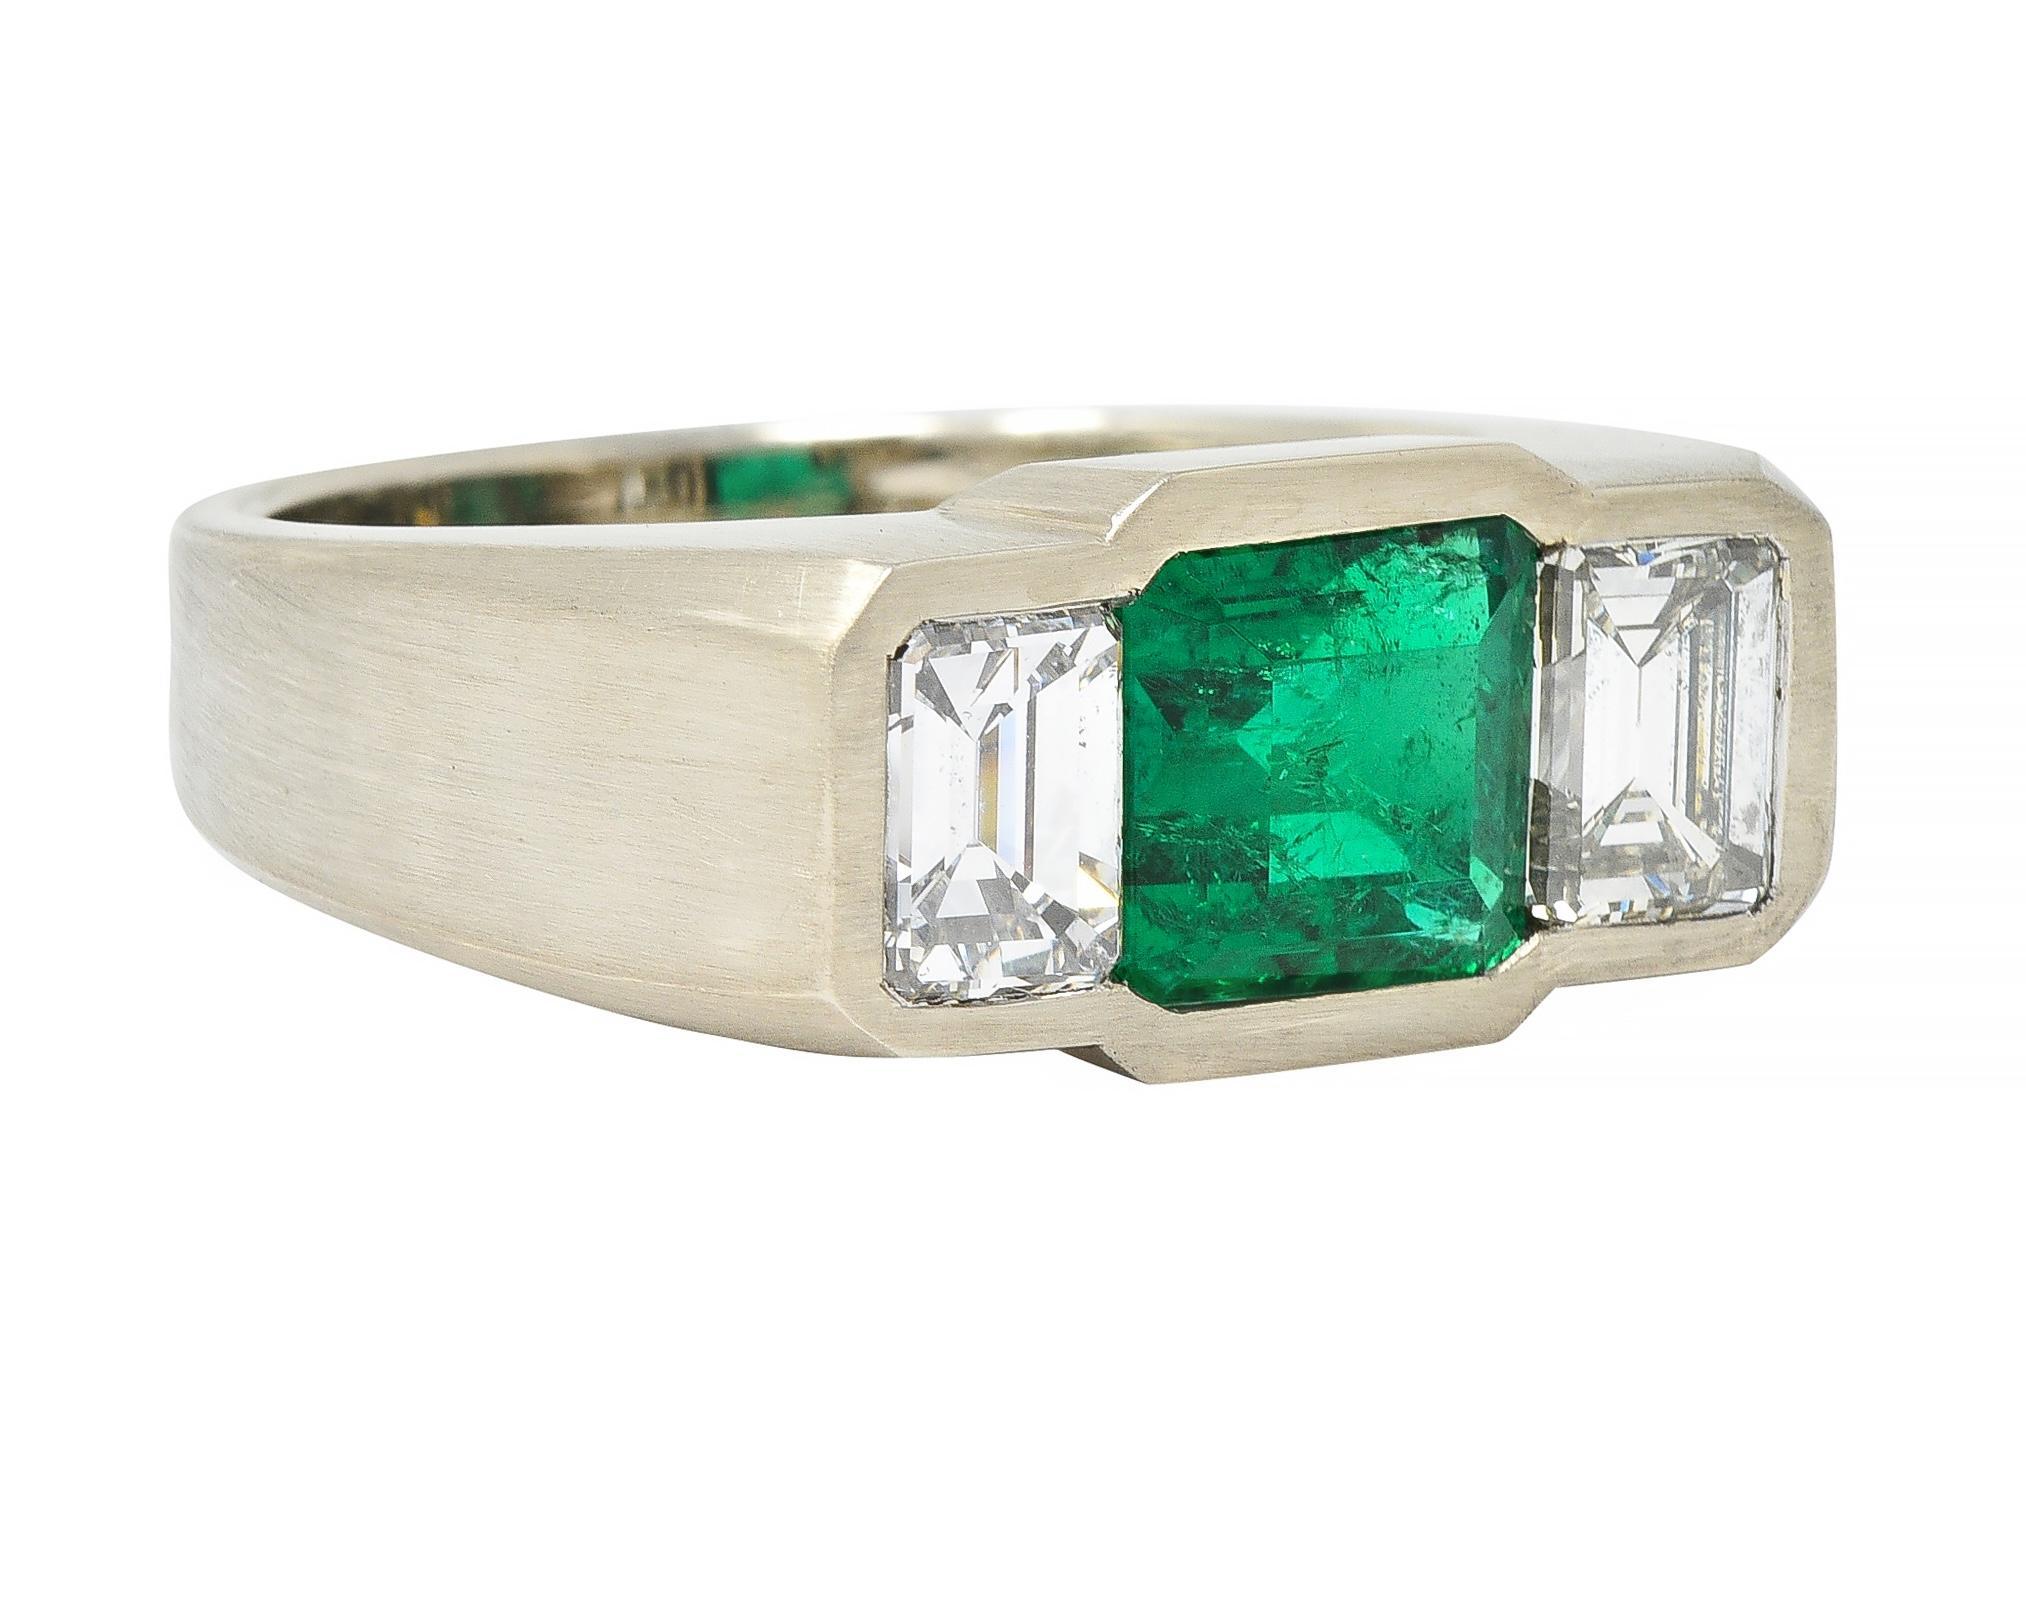 Centering an emerald cut emerald weighing 2.05 carats total - transparent medium green
Natural Colombian in origin with minor traditional clarity treatment 
Flush set and flanked by emerald cut diamonds 
Weighing approximately 1.74 carats total 
H